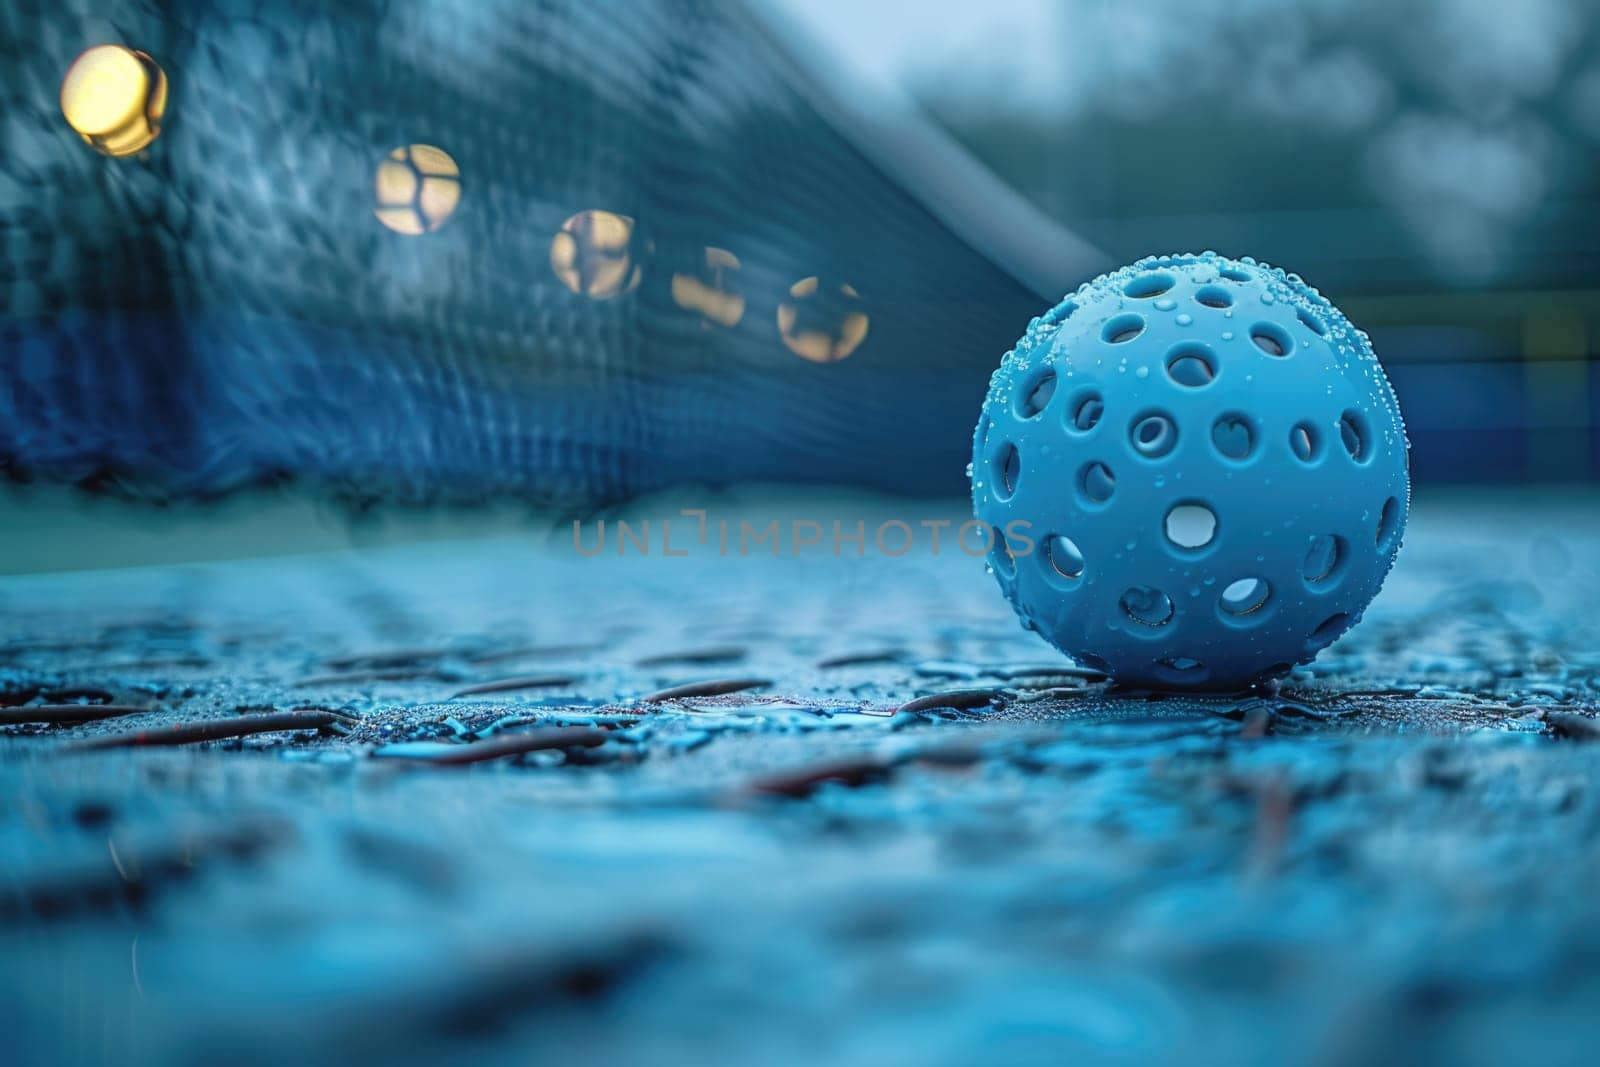 A close up photo of a blue ball resting on a blue floor.